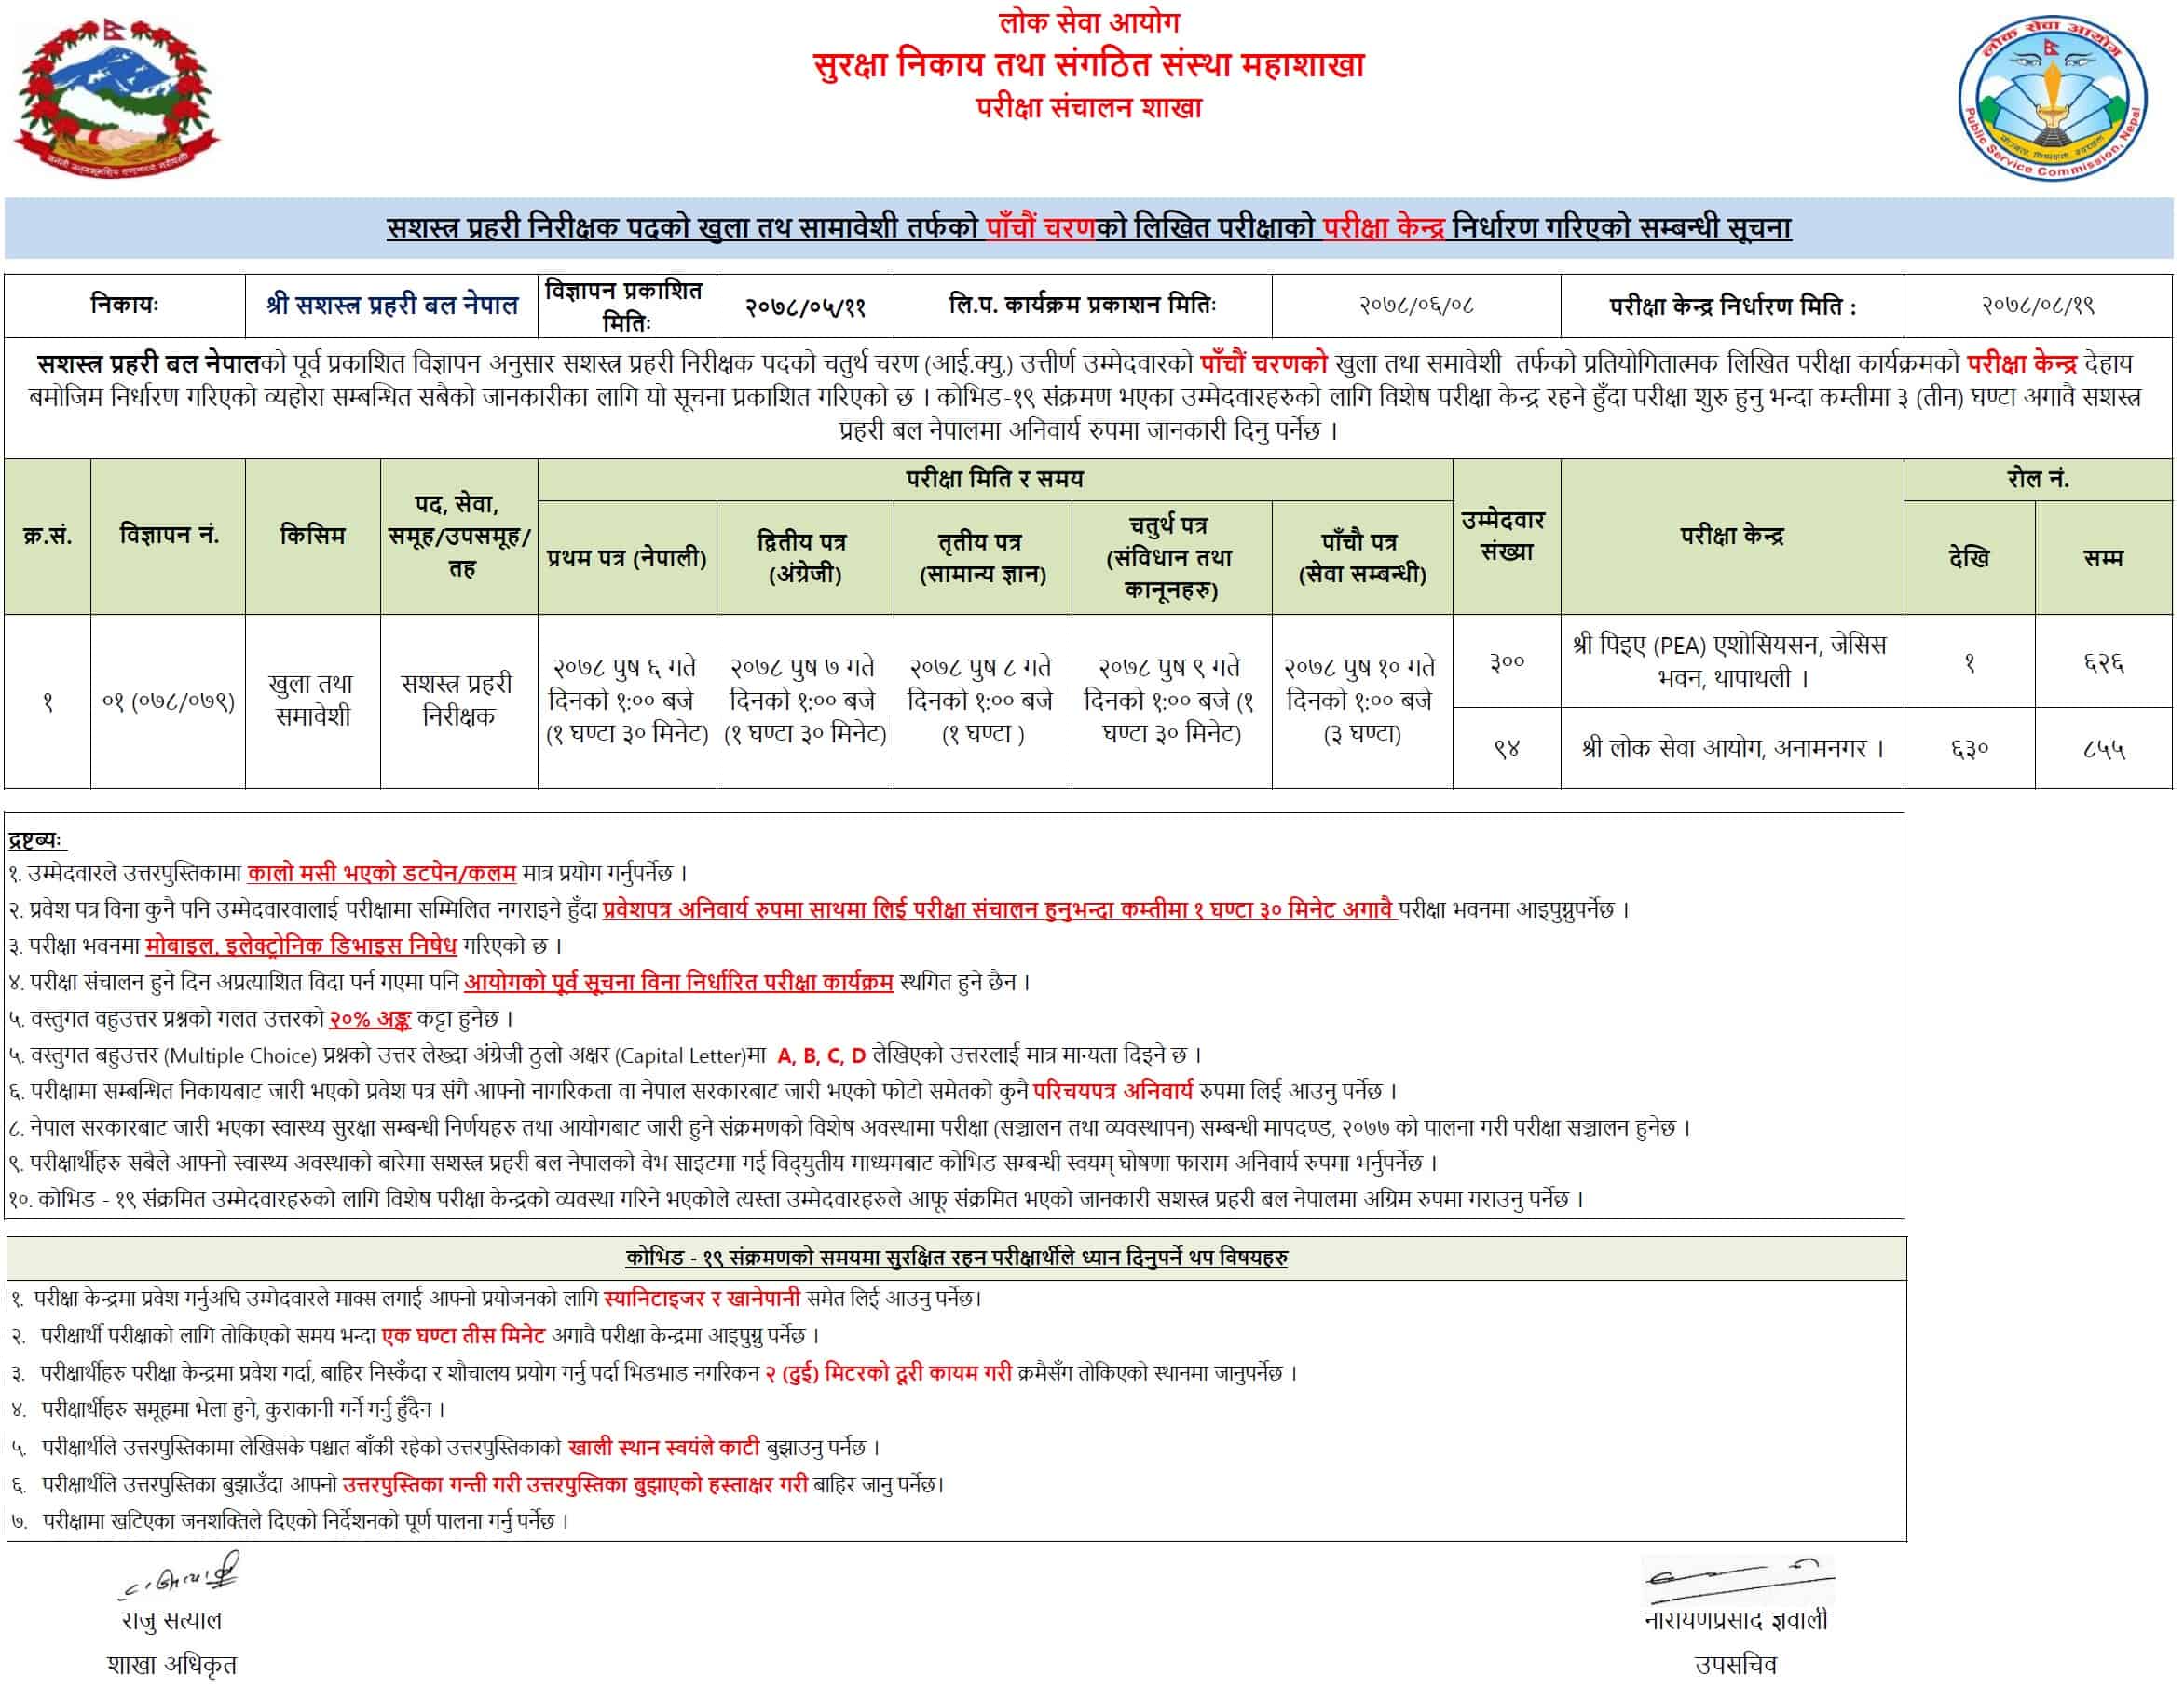 APF Nepal Inspector Post 5th Phase Written Exam Schedule